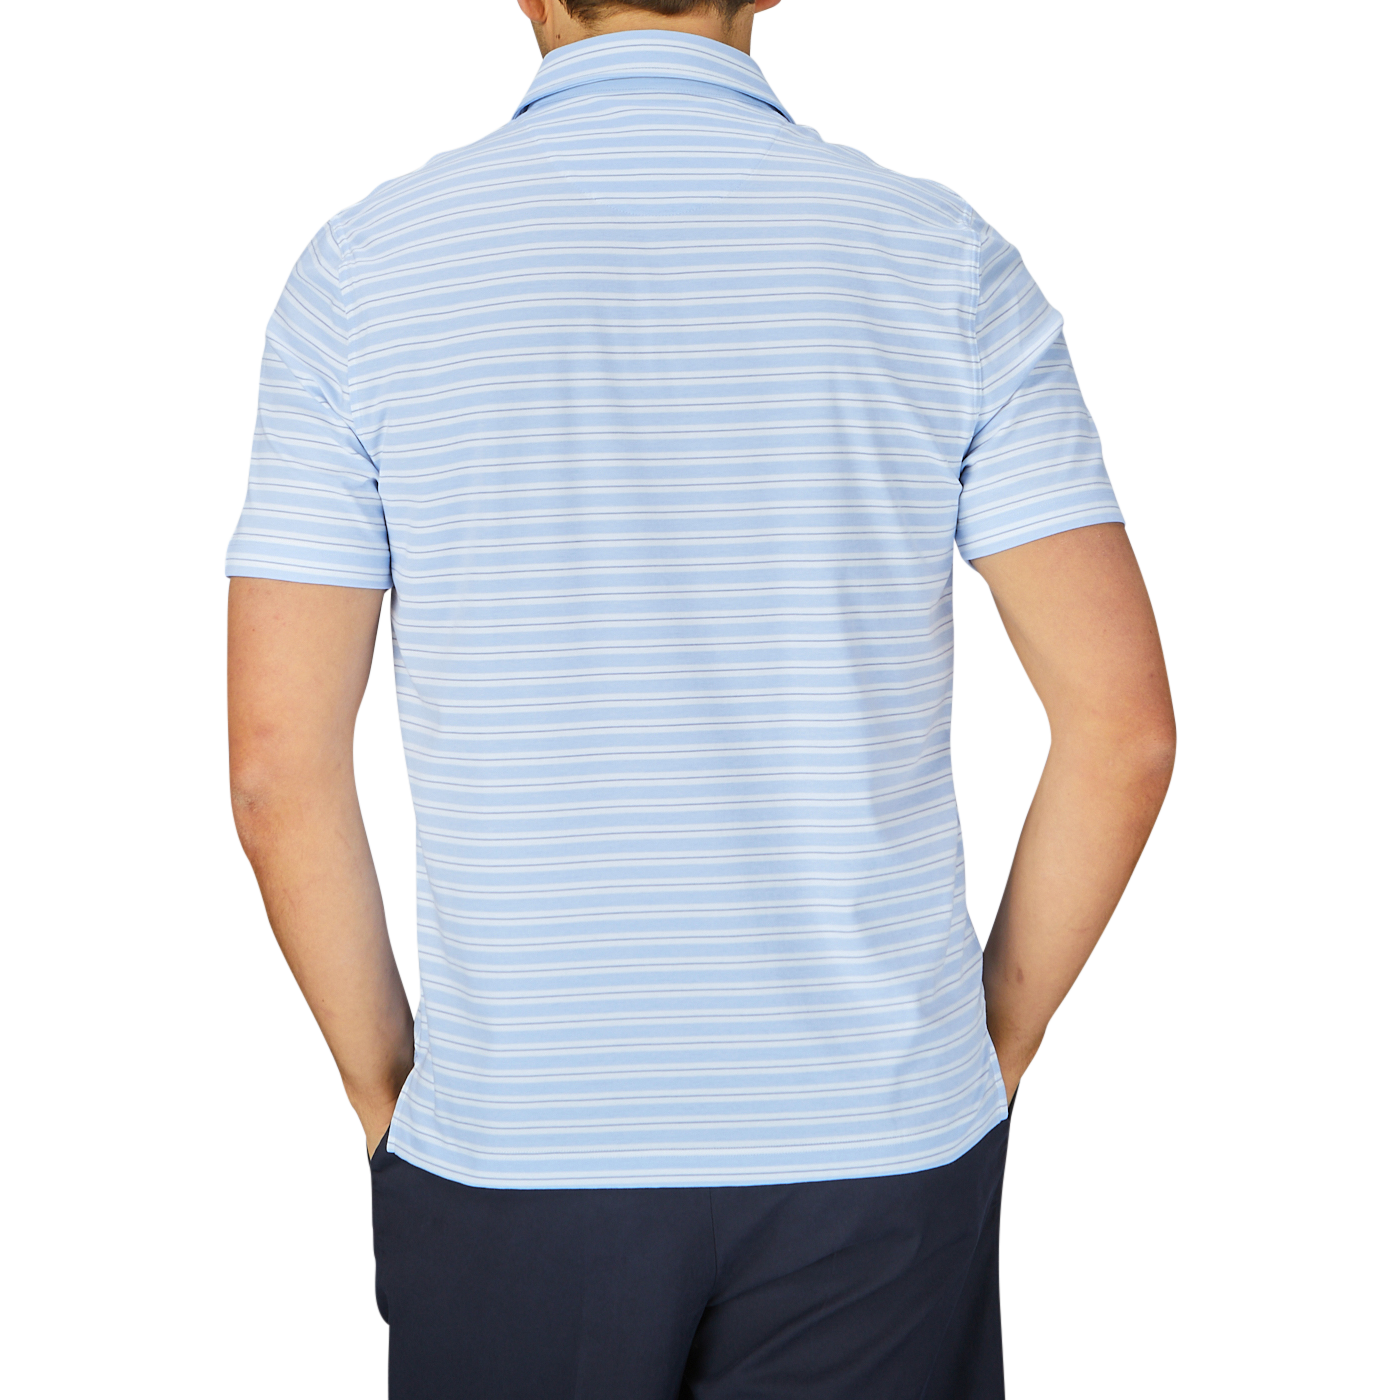 Man standing with his back to the camera wearing a Fedeli Blue Multi Striped Cotton Jersey Polo Shirt.